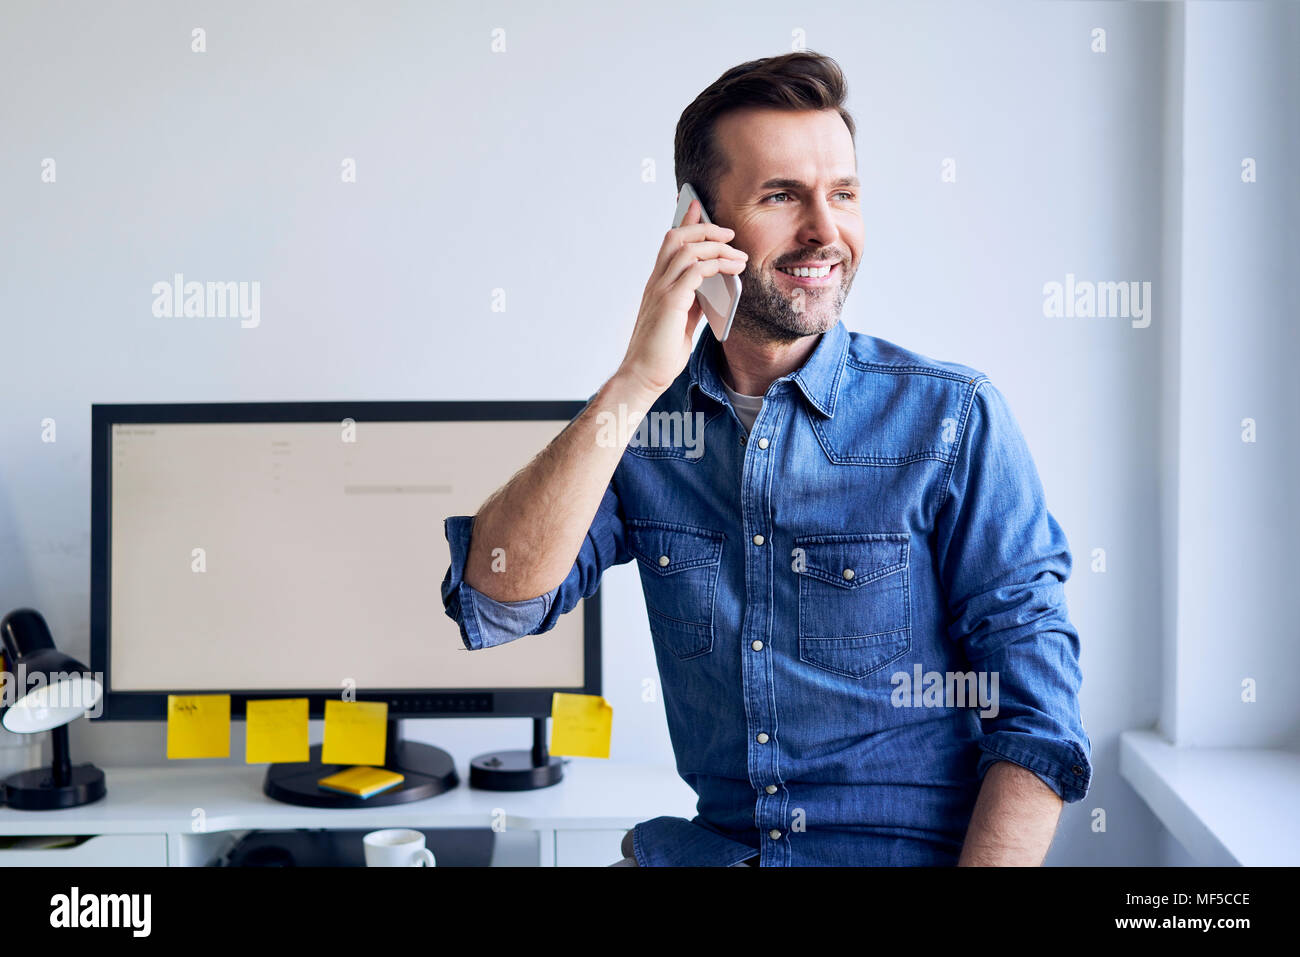 https://c8.alamy.com/comp/MF5CCE/smiling-man-at-desk-in-office-talking-on-the-phone-MF5CCE.jpg